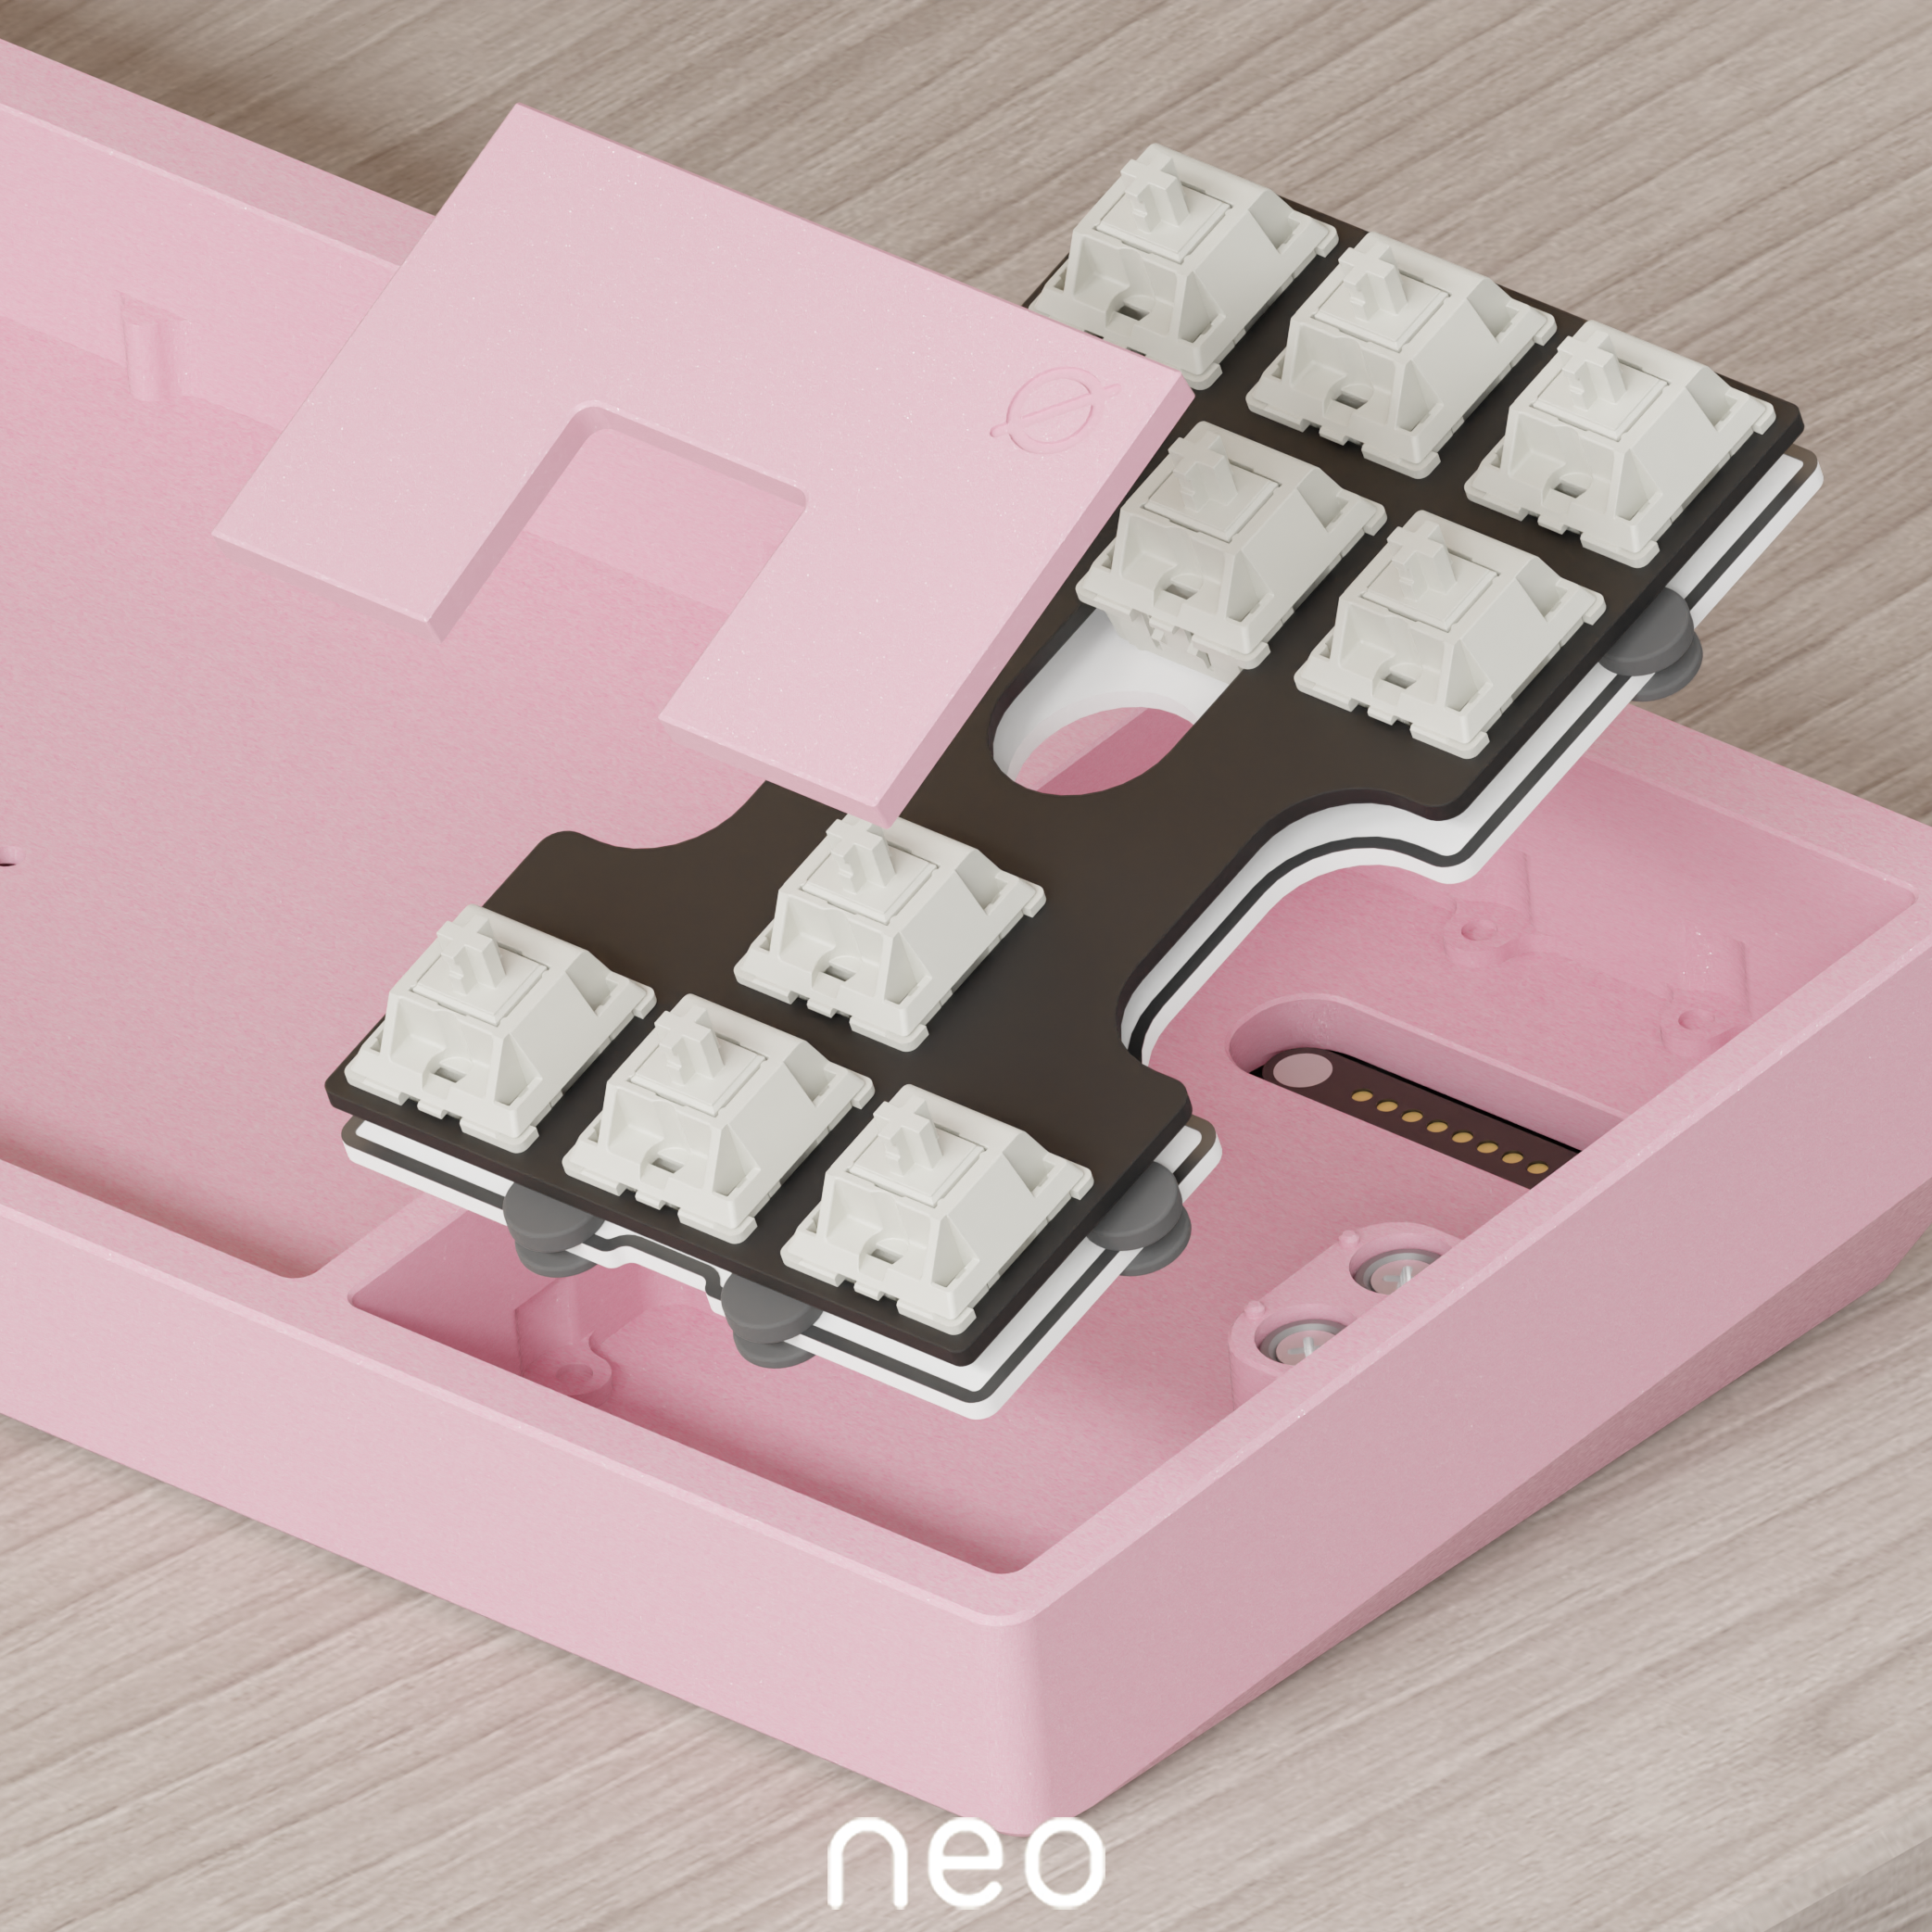 Neo70 - Anodized Version